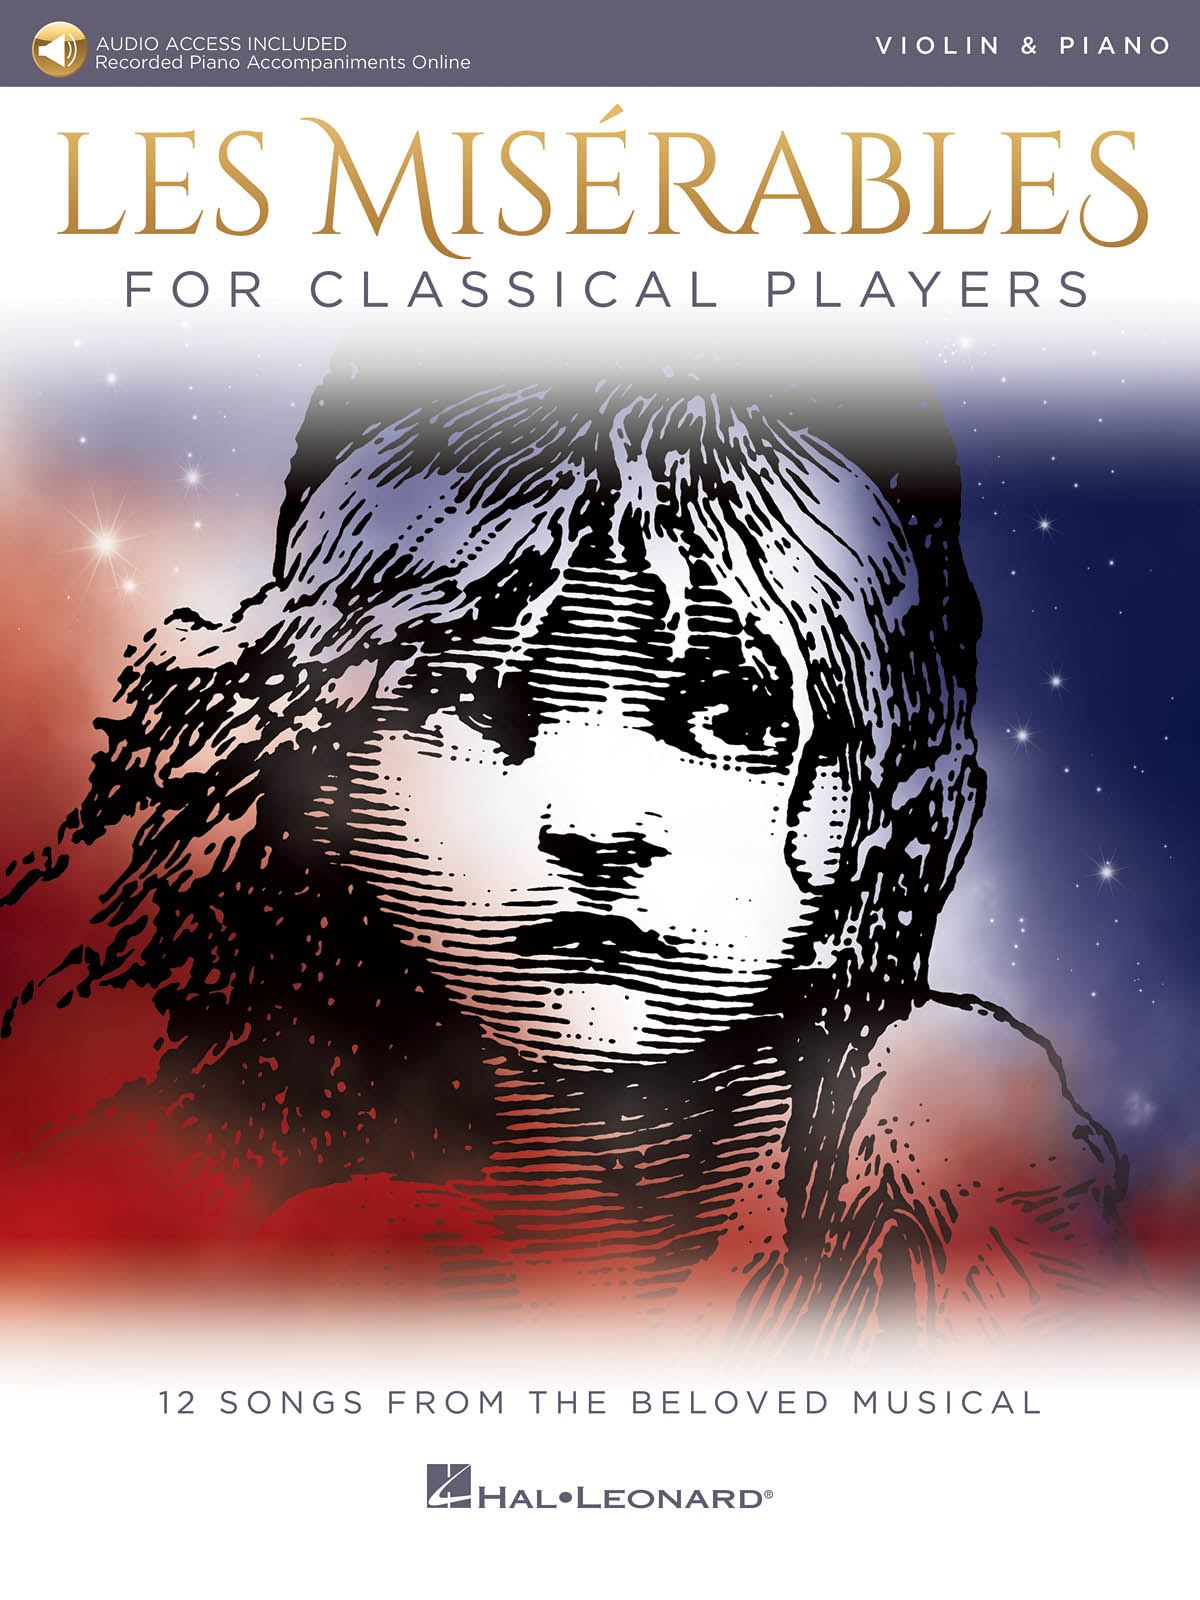 Alain Boublil Claude-Michel Schnberg: Les Misrables for Classical Players: